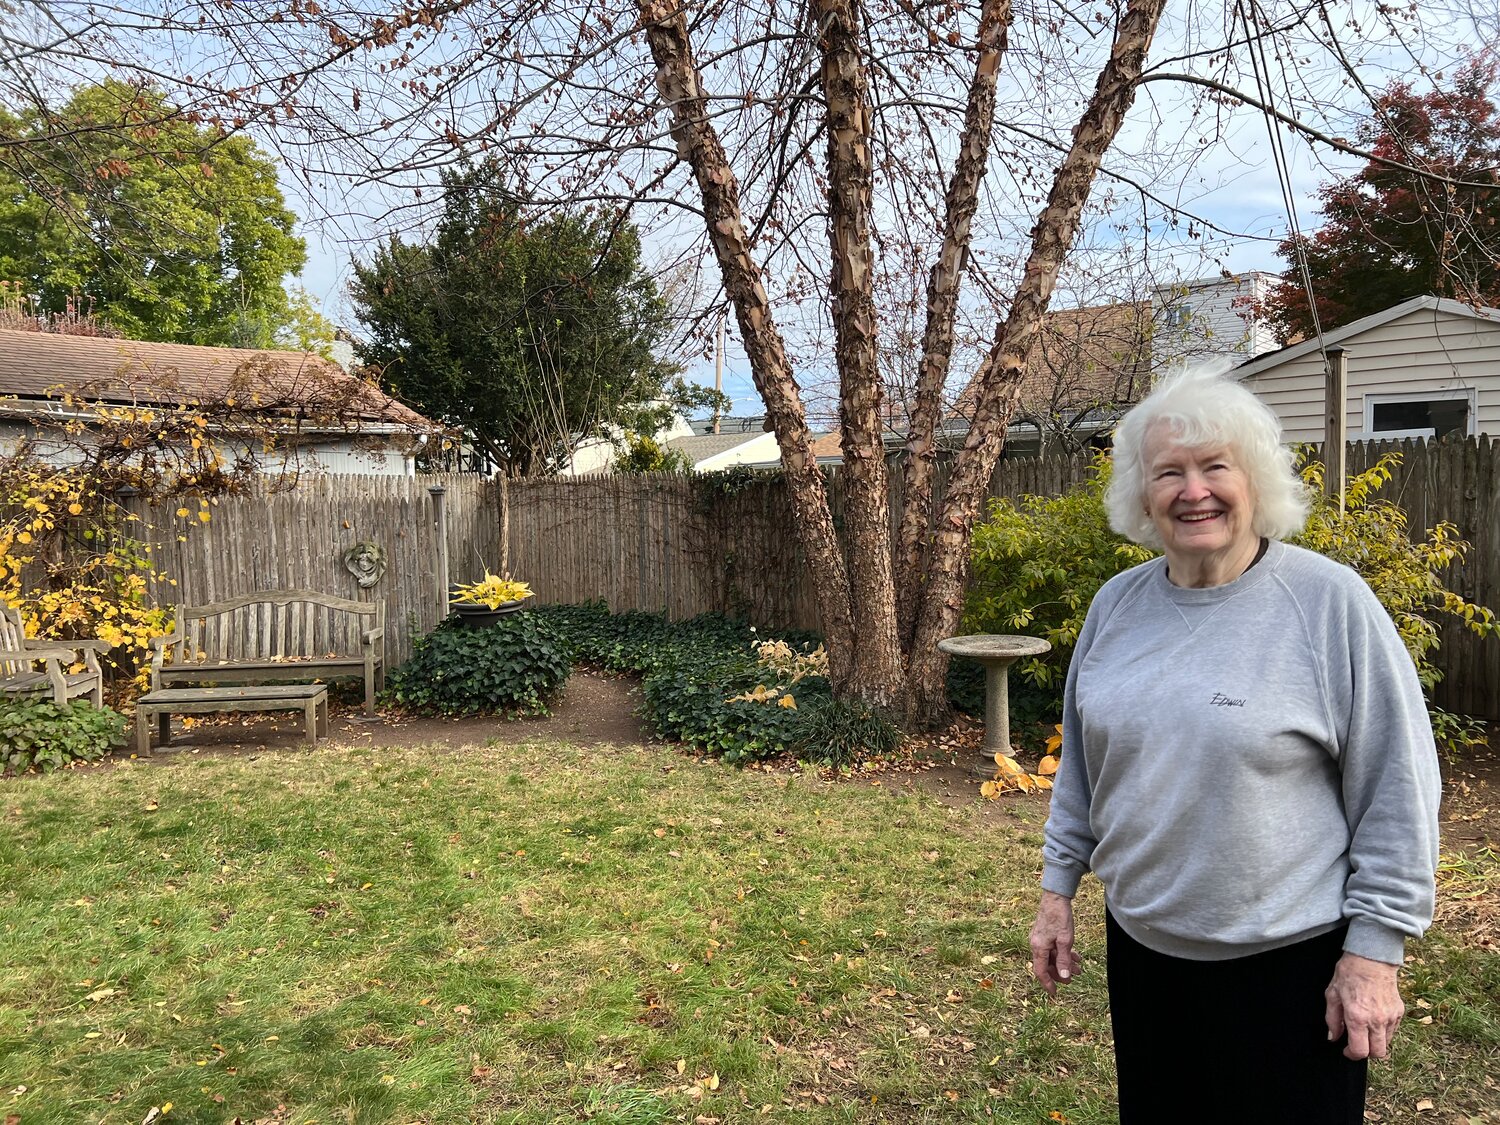 Mary-Rose Waldron has lived at her house on Bedford Avenue for 55 years. She has benefited from Shake-A-Rake since its inception in 2009. “Every year it becomes more important to me as I get older and have less energy and stamina,” Waldron said on Saturday.